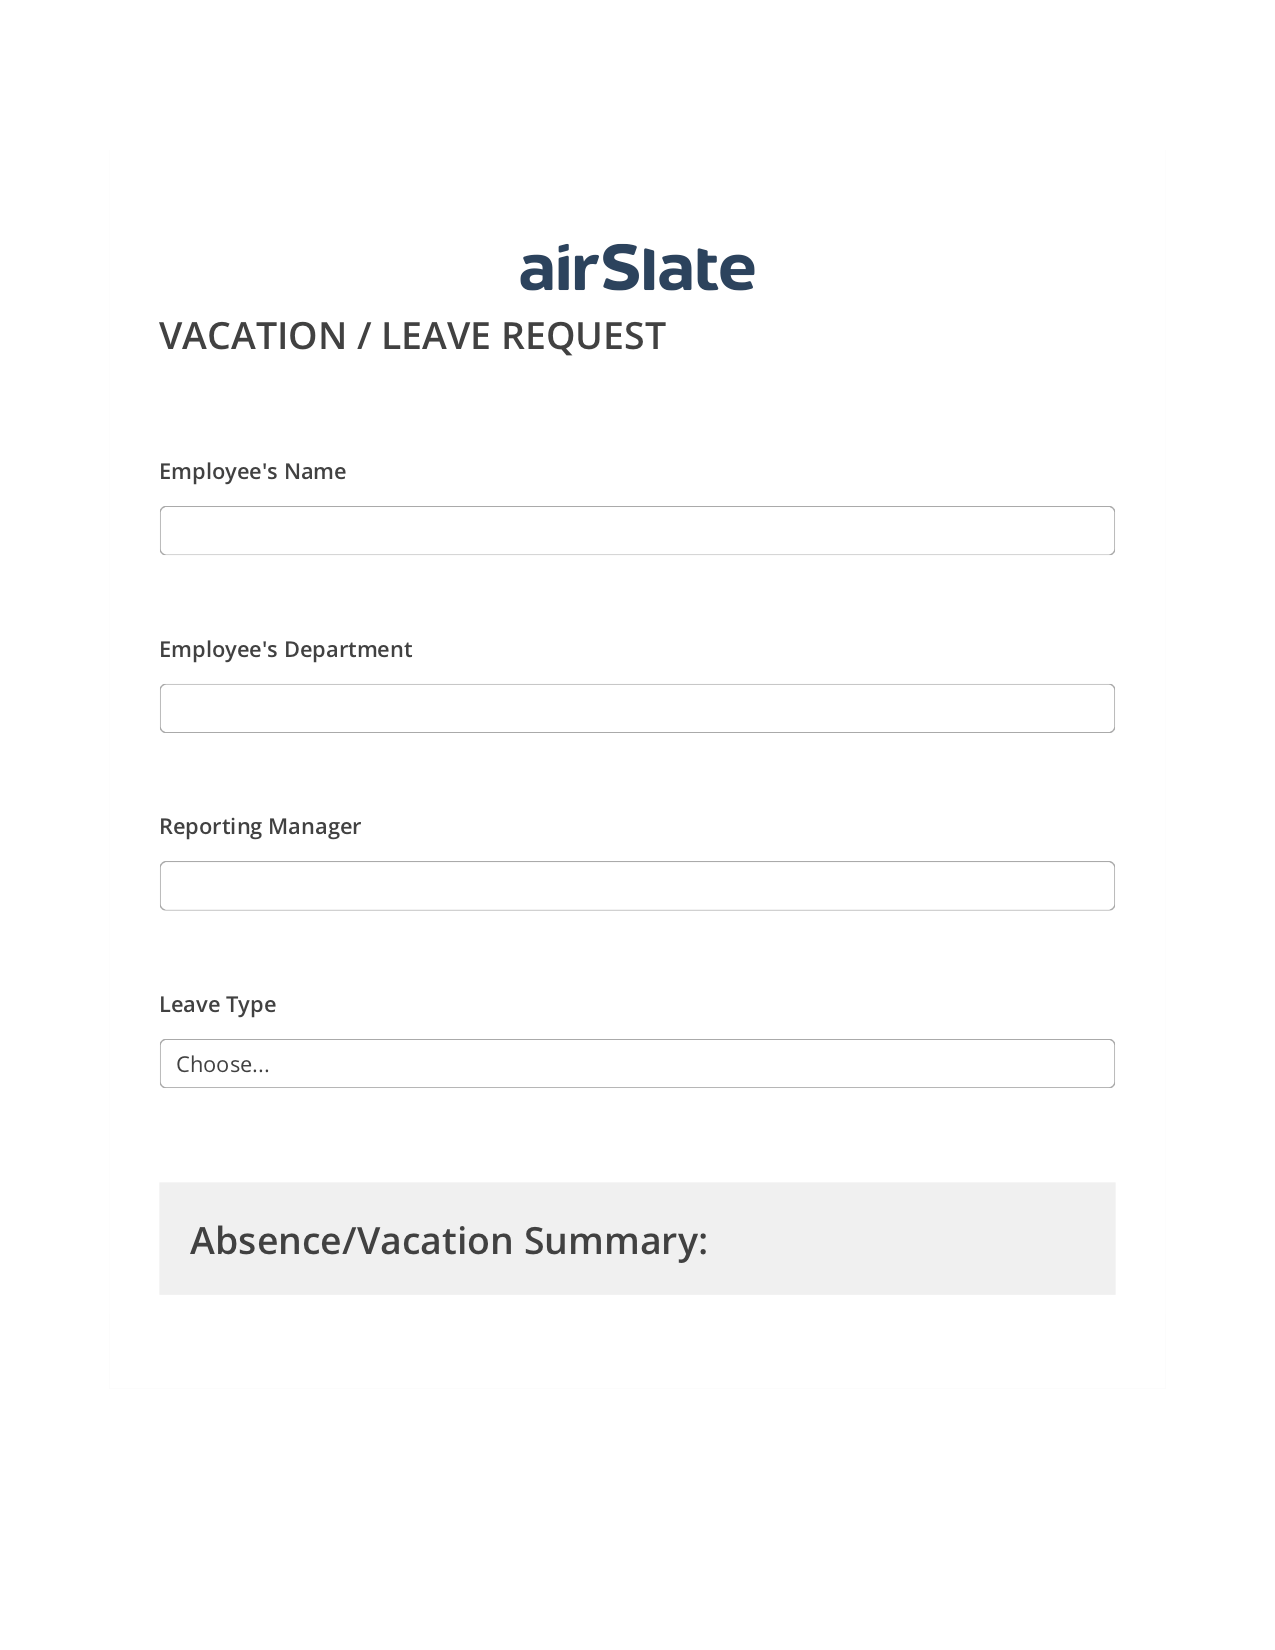 Vacation/Leave Request Workflow System Bot - Slack Two-Way Binding Bot, Create slate bot, Archive to SharePoint Folder Bot